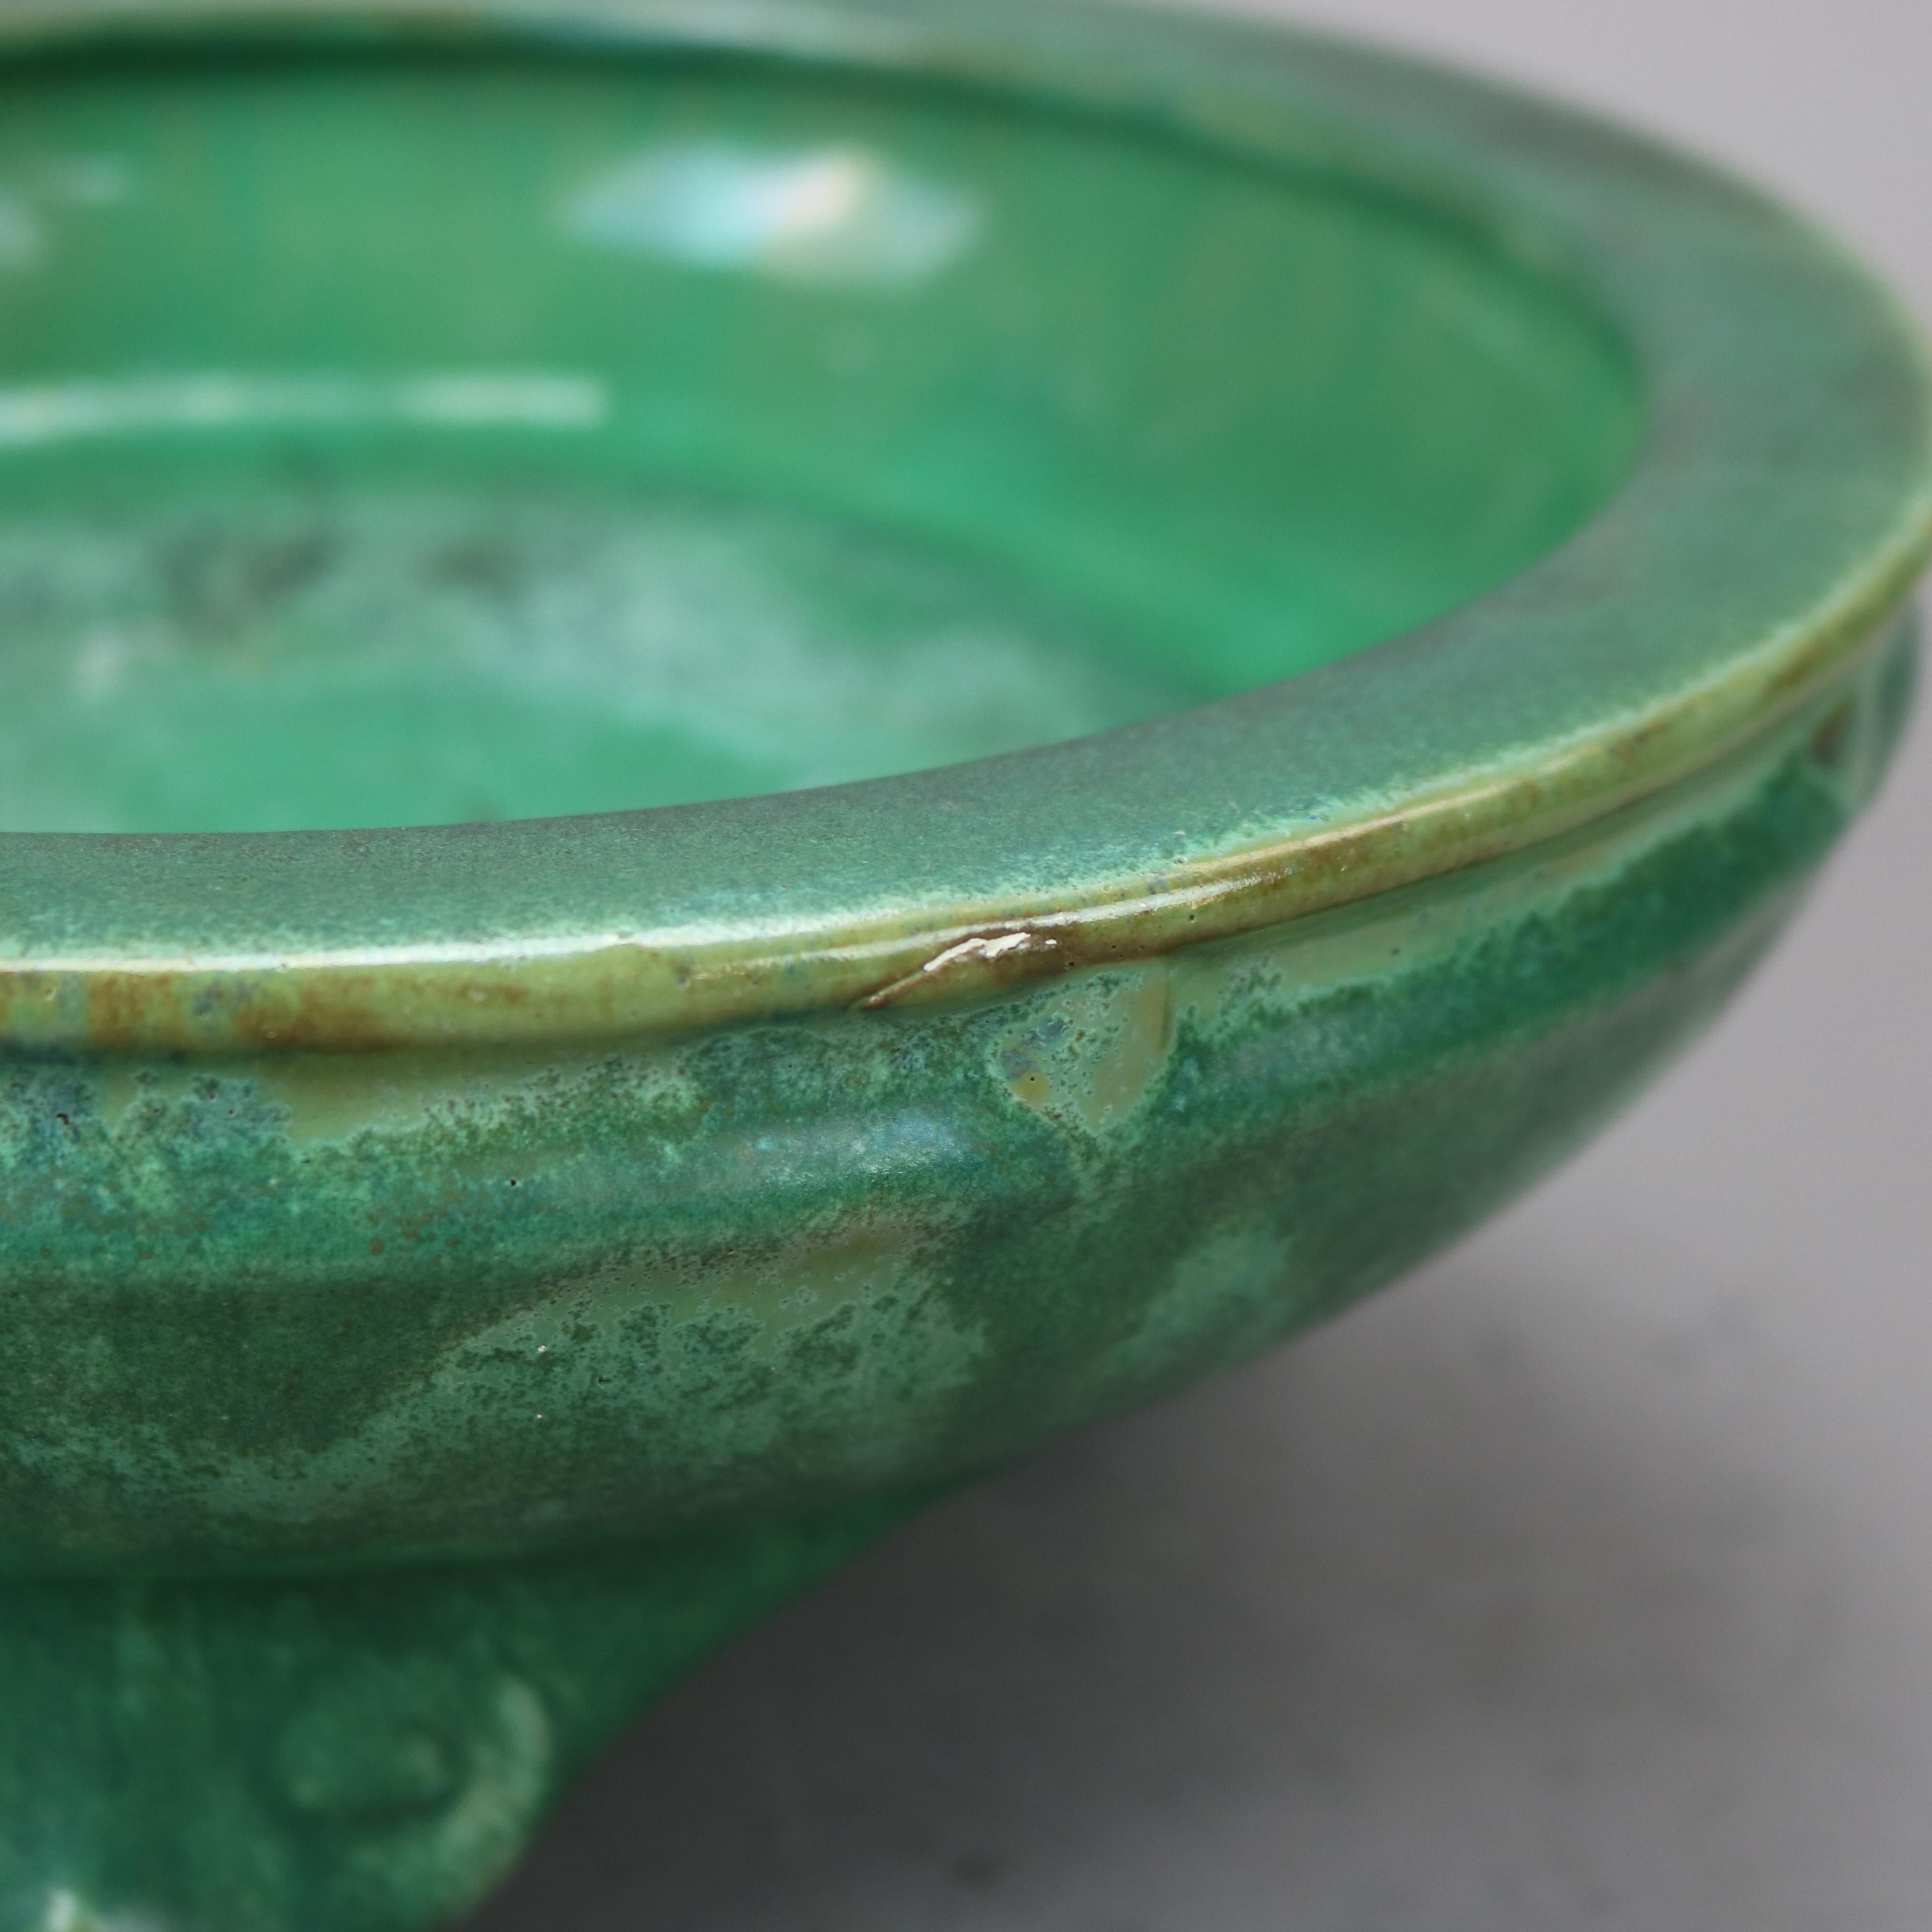 20th Century Arts & Crafts Fulper Green Glazed Art Pottery Footed Low Center Bowl c1920